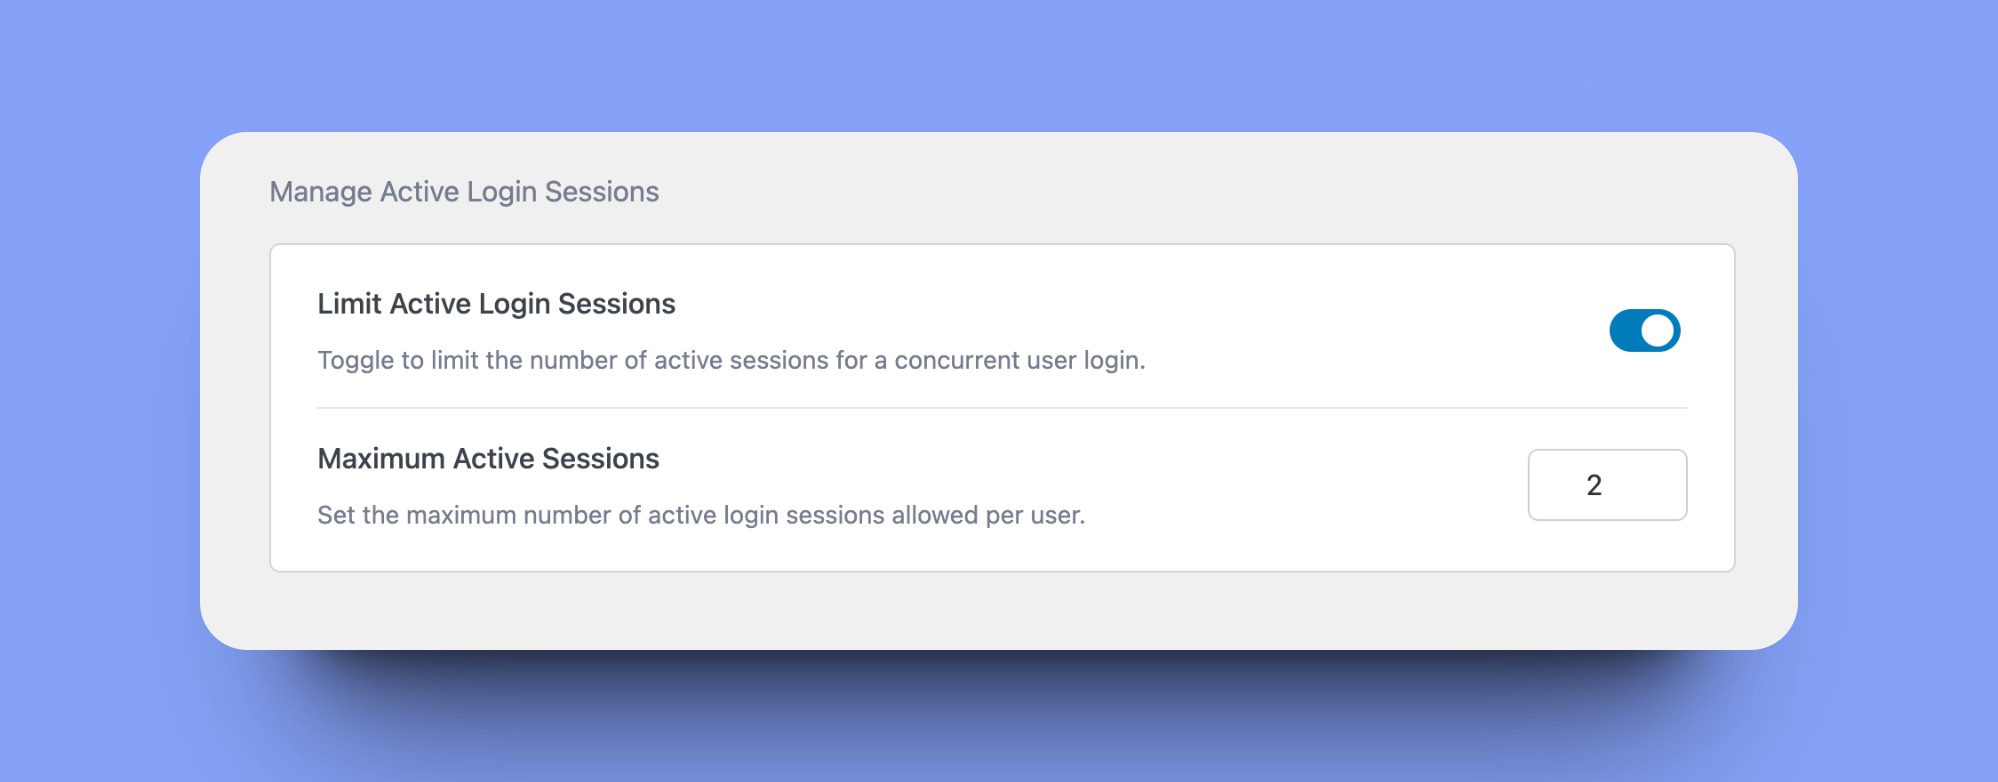 Manage-Active-Login-Sessions